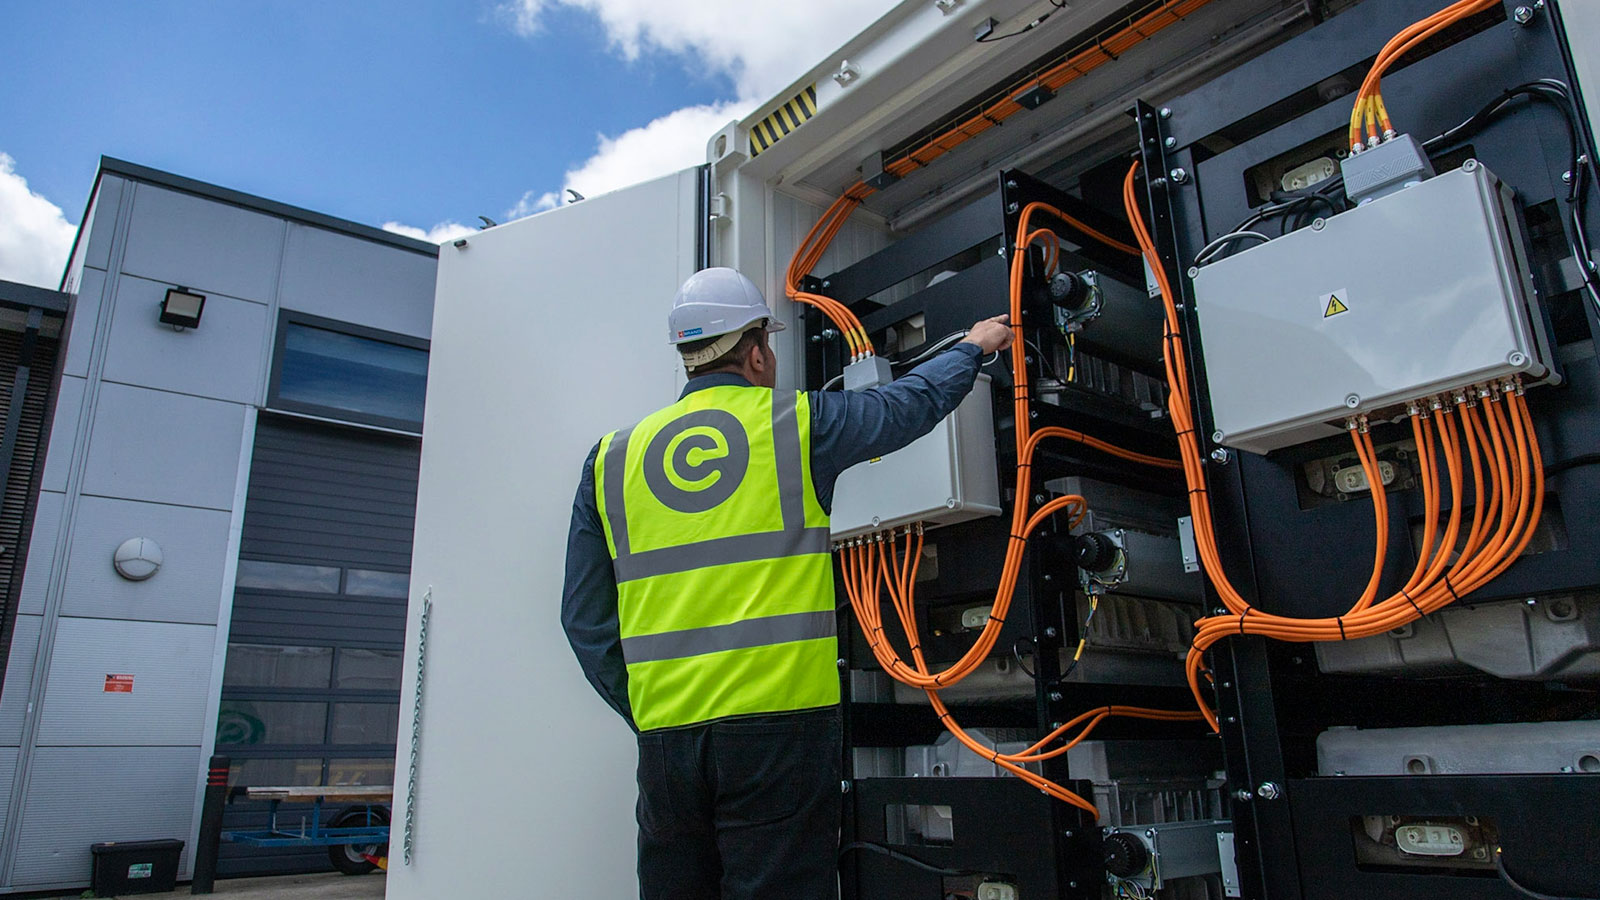 Connected Energy collaborates with Nissan on project to boost EV battery sustainability